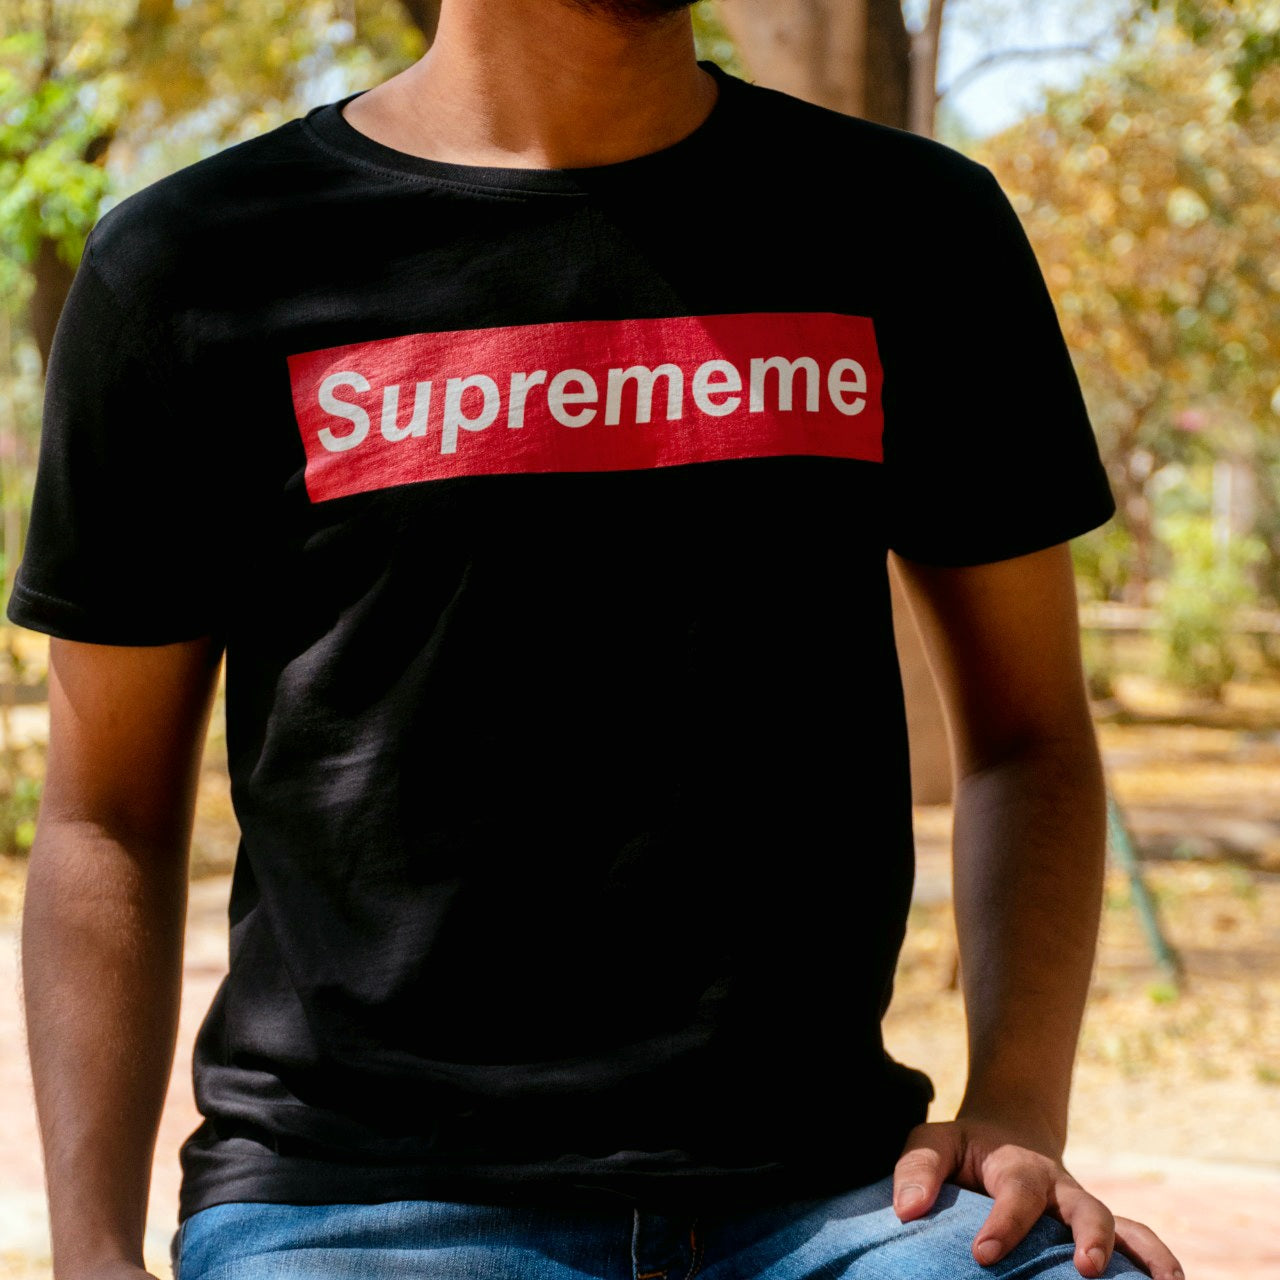 torso of man wearing a black tshirt with suprememe printed on it in red colour